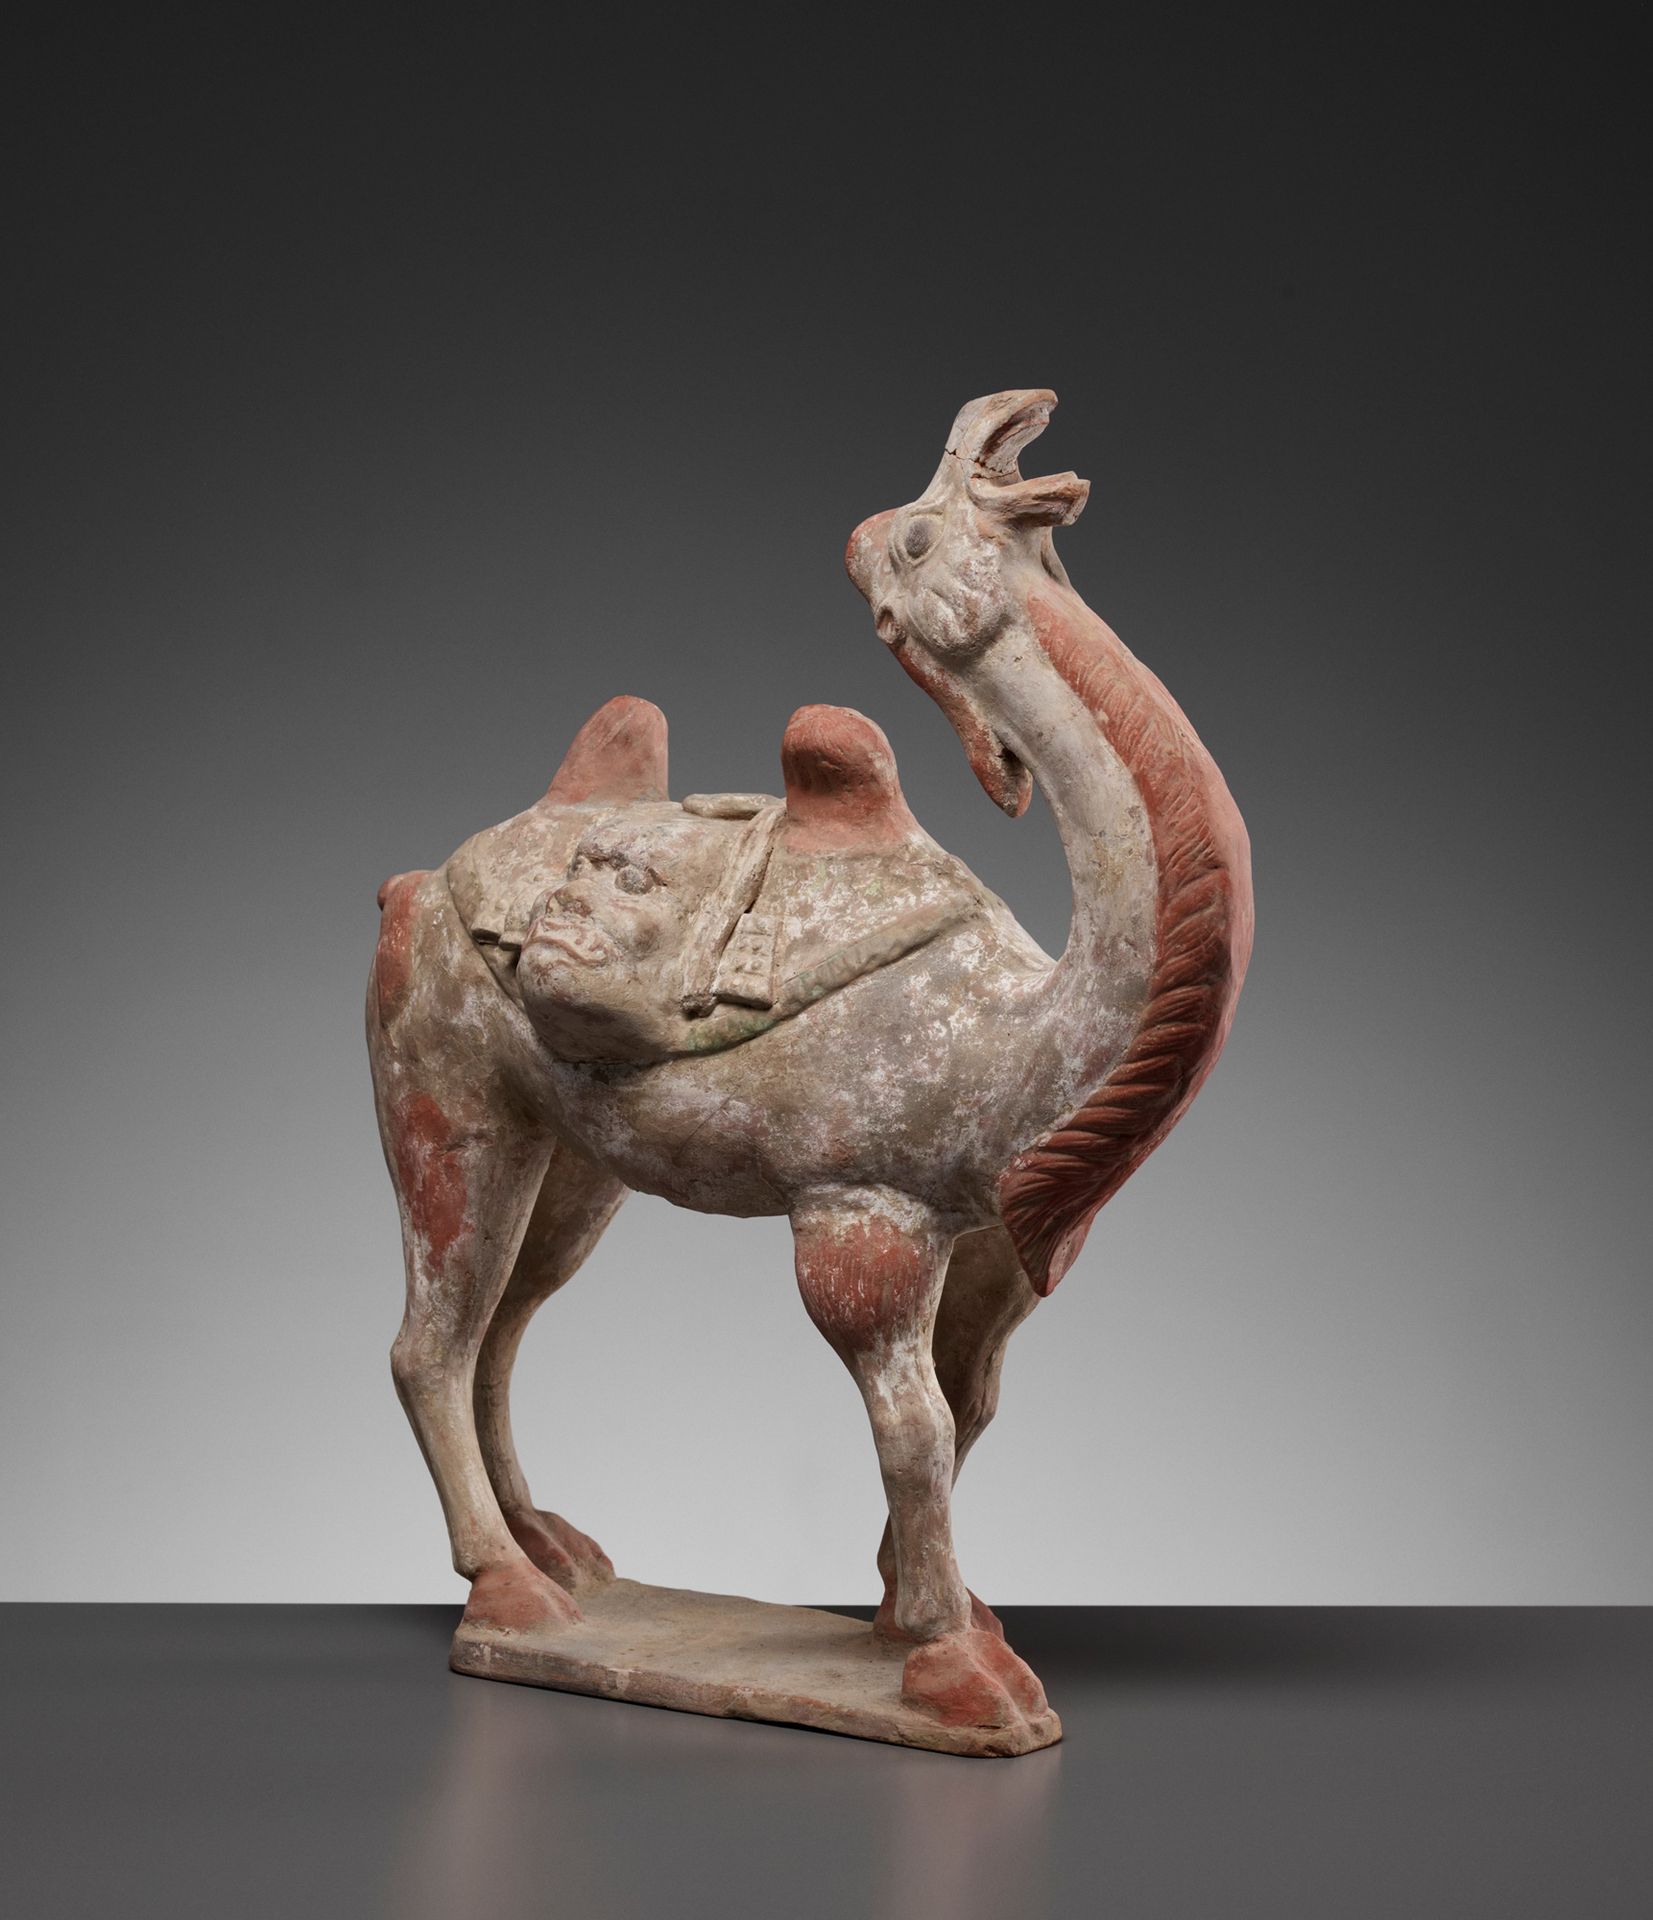 A PAINTED POTTERY FIGURE OF A BACTRIAN CAMEL, TANG DYNASTY FIGURA DE CERÁMICA PI&hellip;